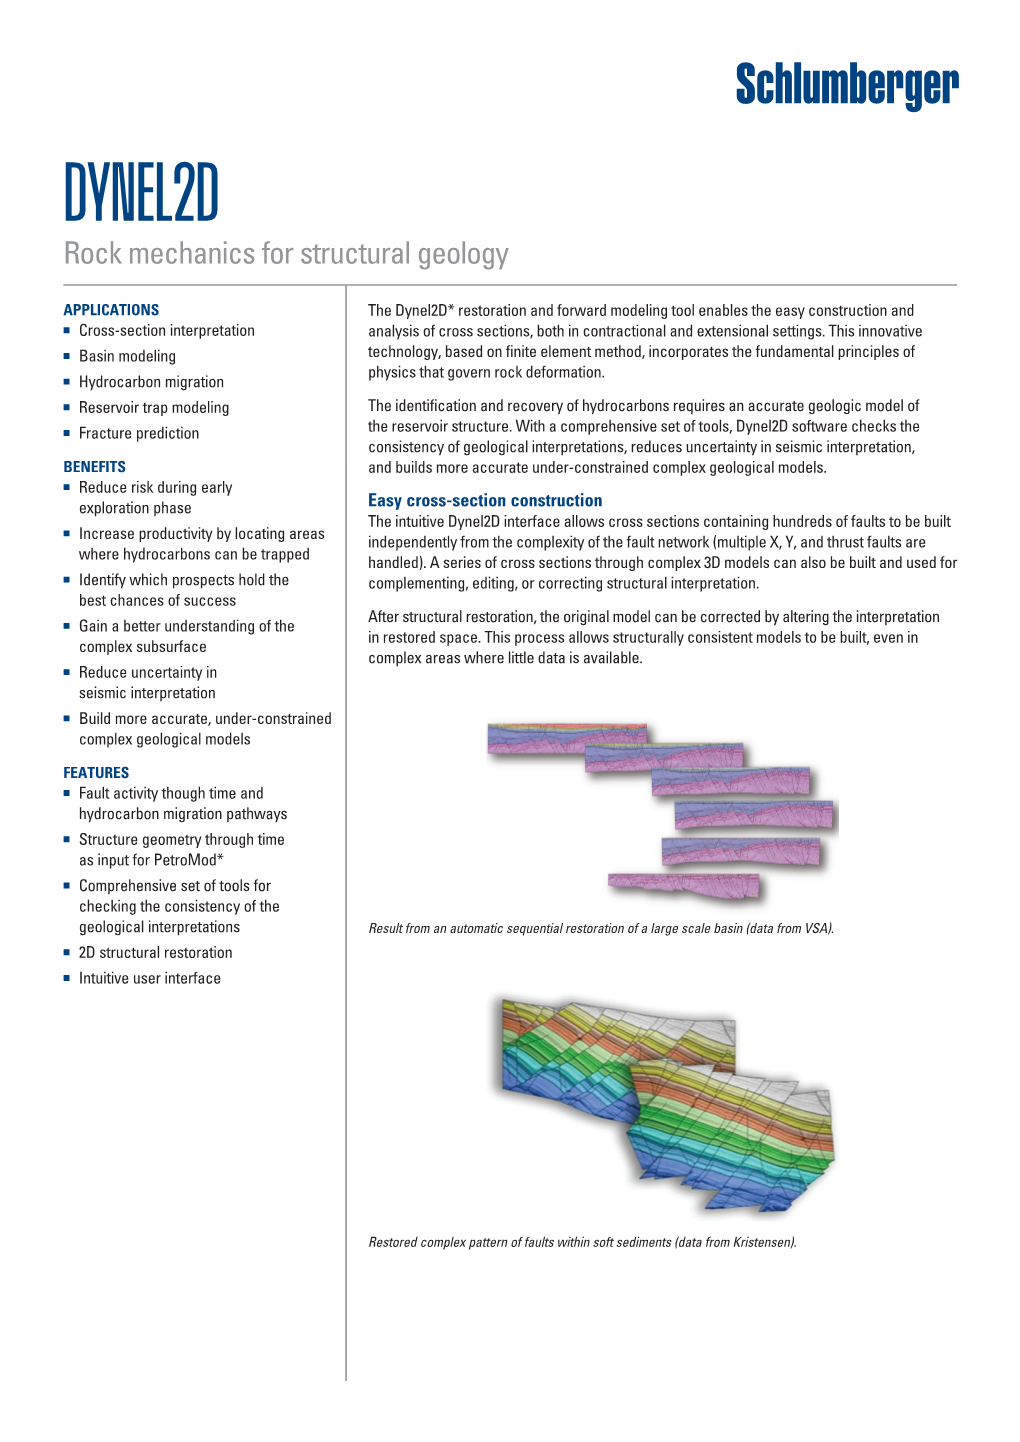 DYNEL2D Rock Mechanics for Structural Geology